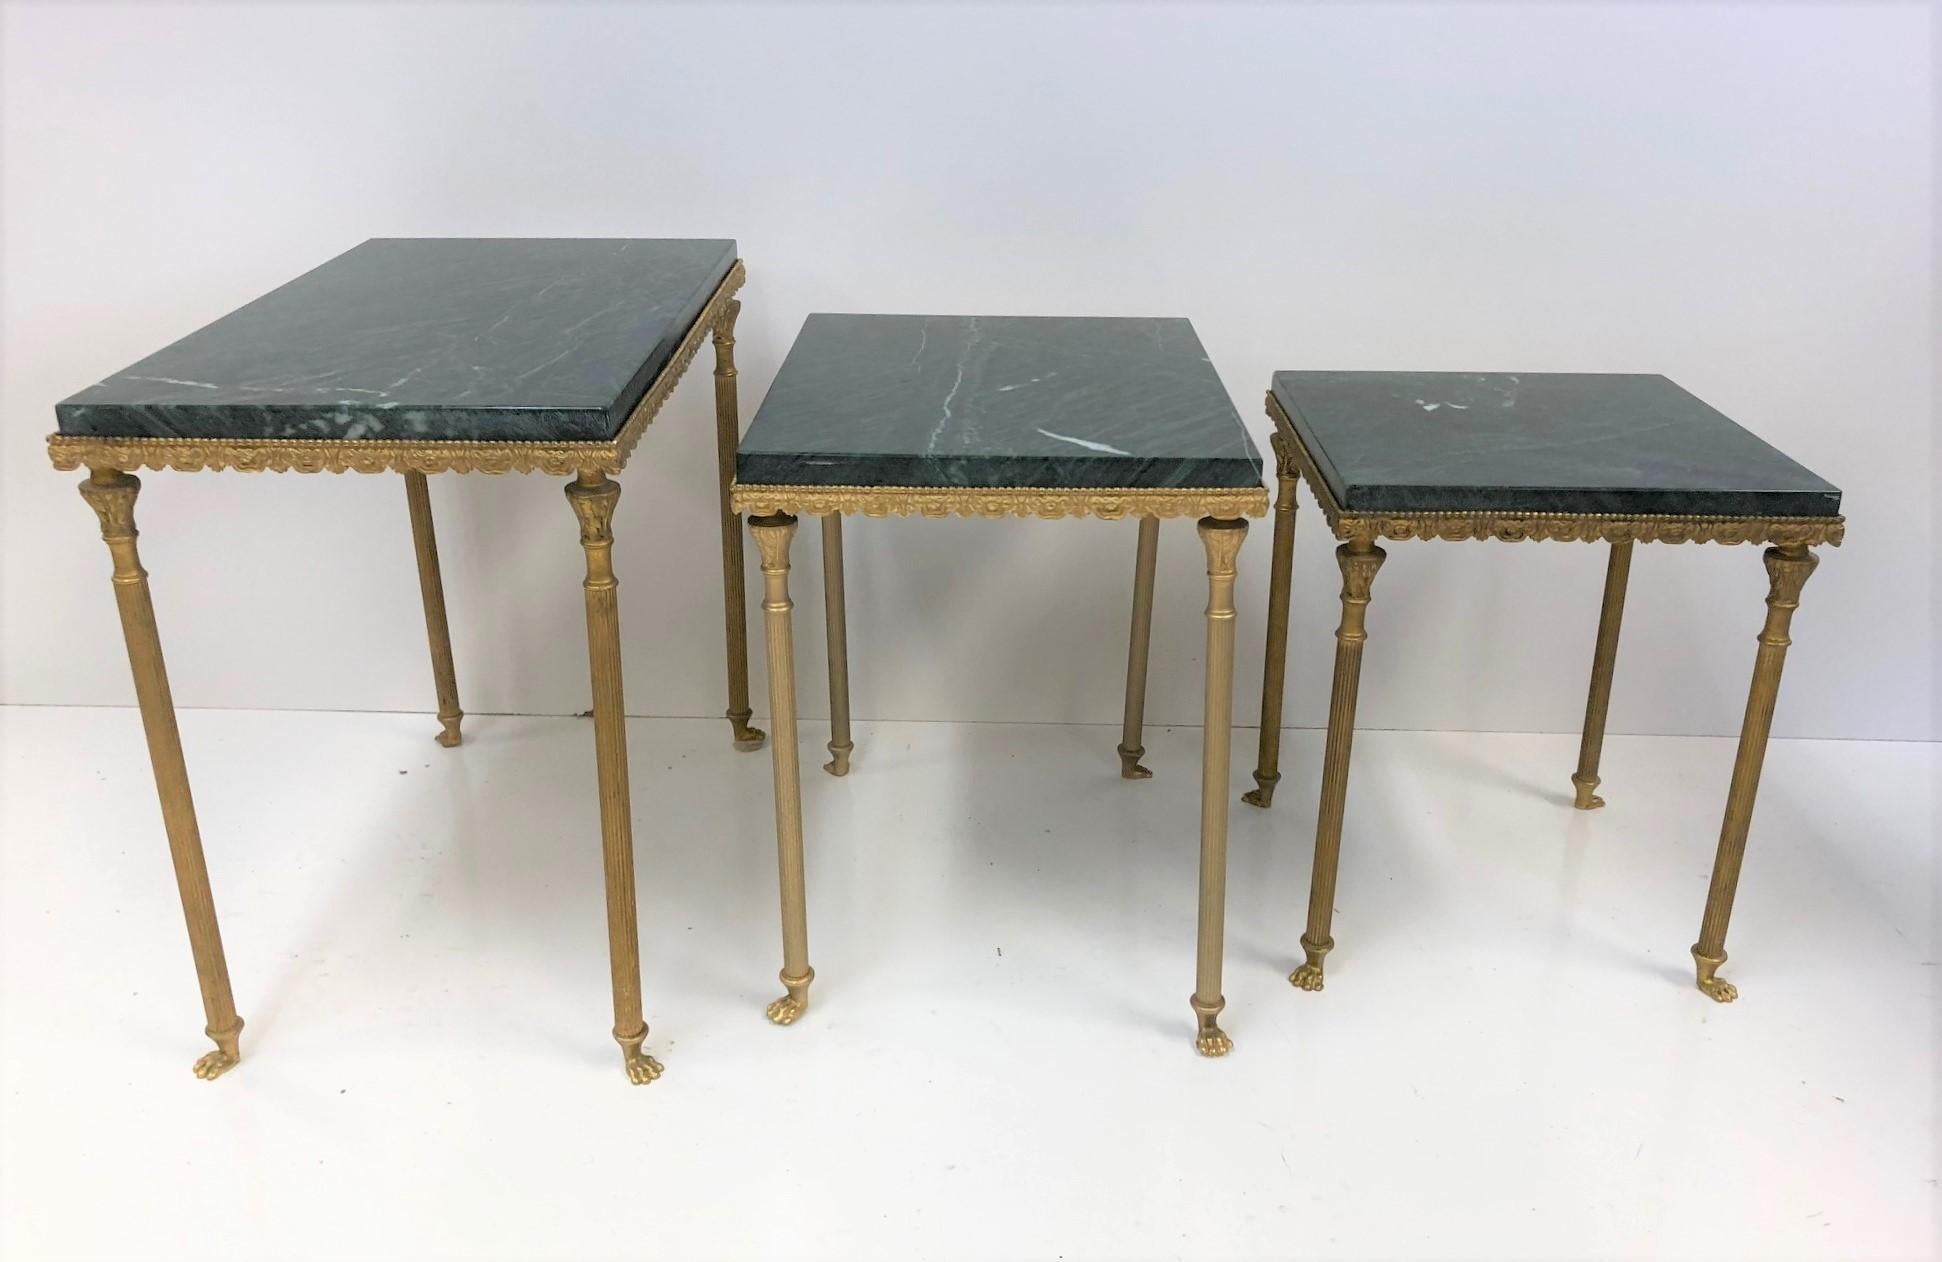 Louis XIV style bronze & marble nesting tables. Decorative bronze frame has columned style legs with feet. Green marble tops.
Larger table measures: 17 H x 12 D x 19.75 W.